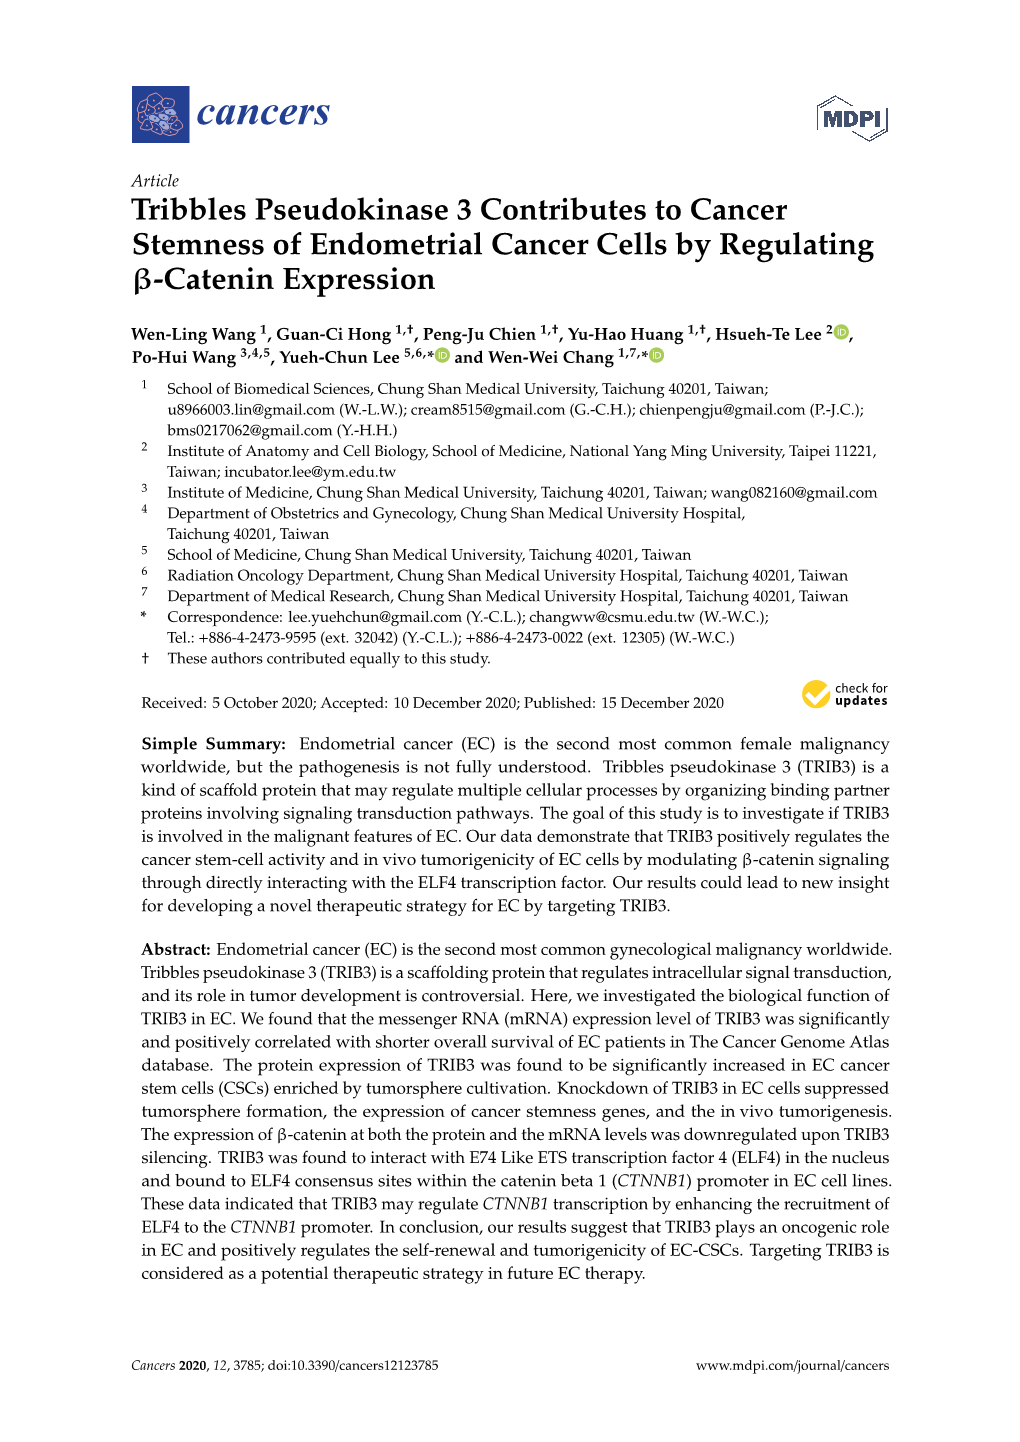 Tribbles Pseudokinase 3 Contributes to Cancer Stemness of Endometrial Cancer Cells by Regulating Β-Catenin Expression